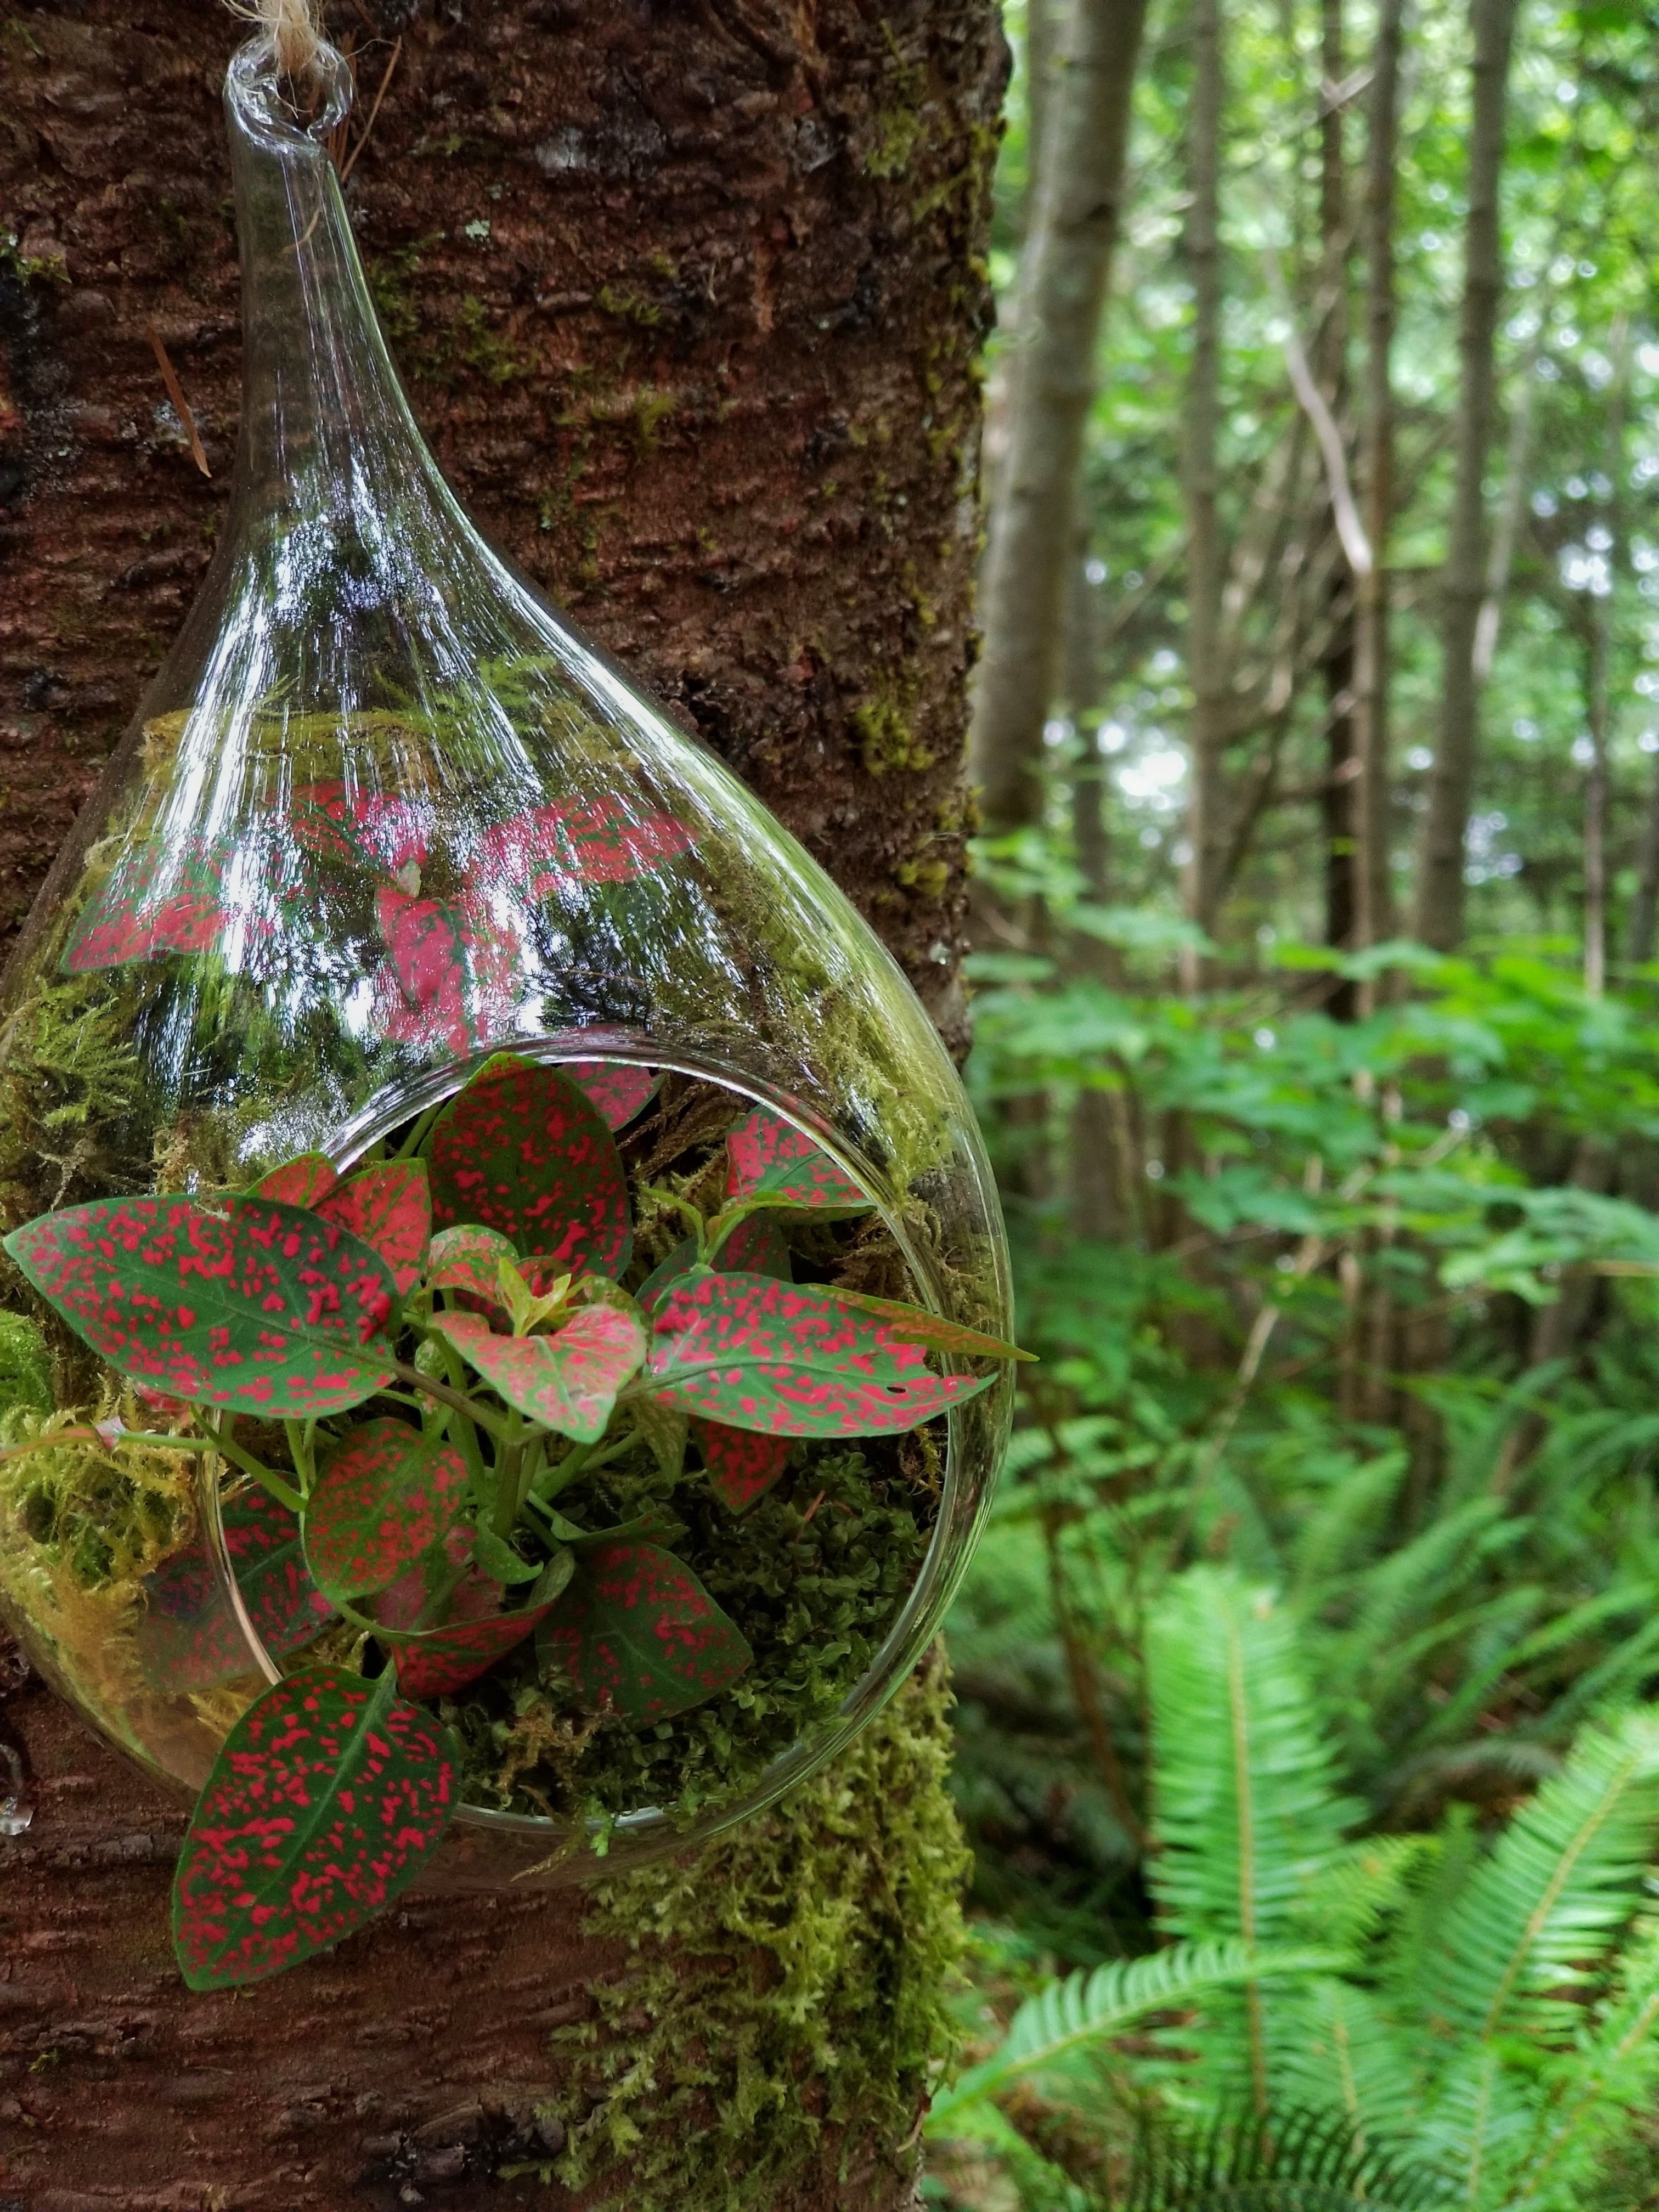 Terrariums hanging from the surrounding trees add to the charm of the Orchid Garden